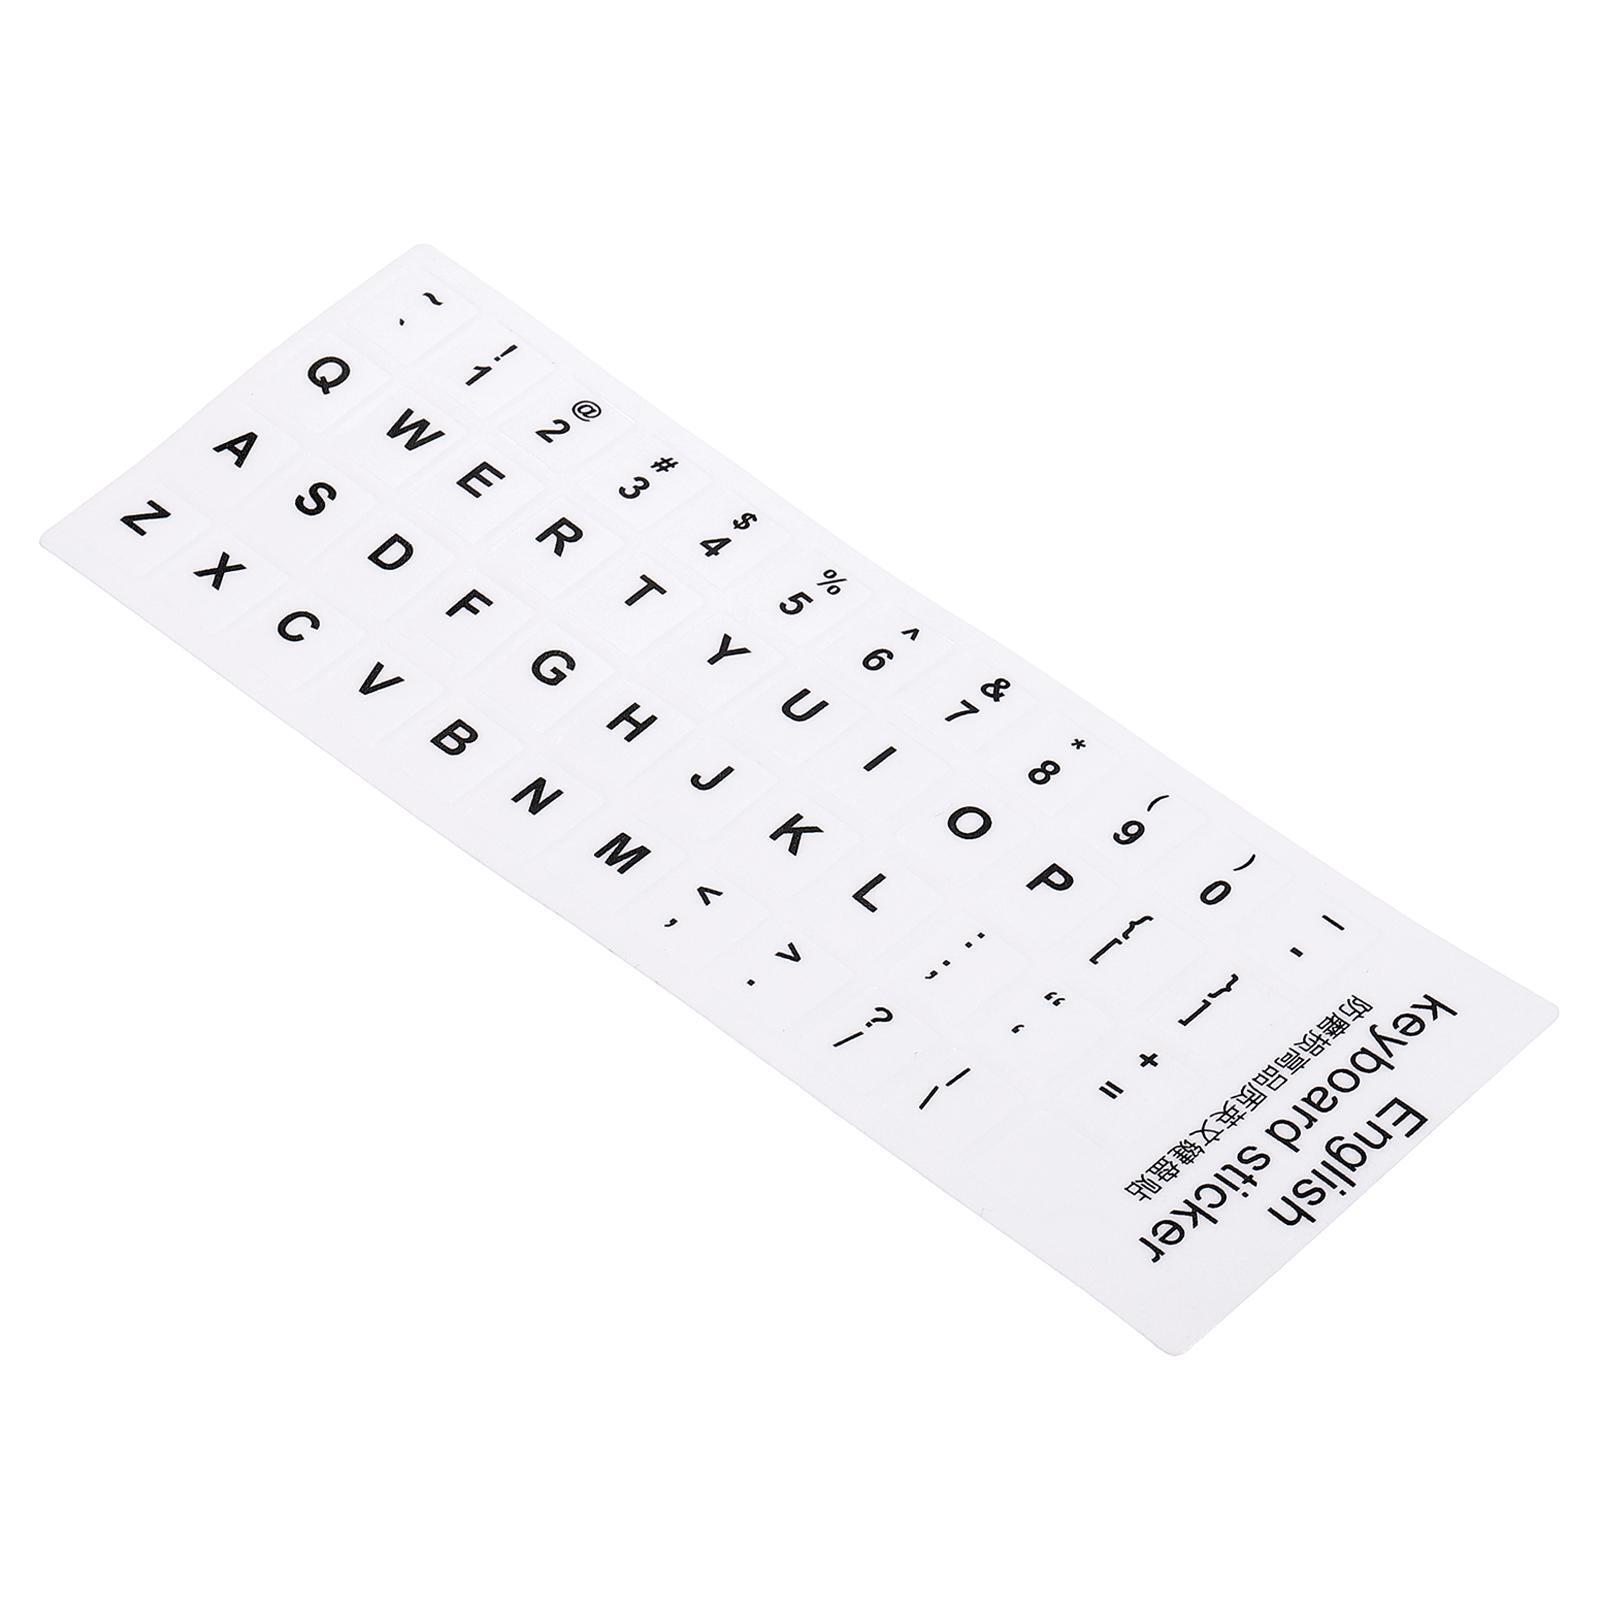 English Keyboard Stickers, 2Pcs Computer Cover White Background Black Lettering